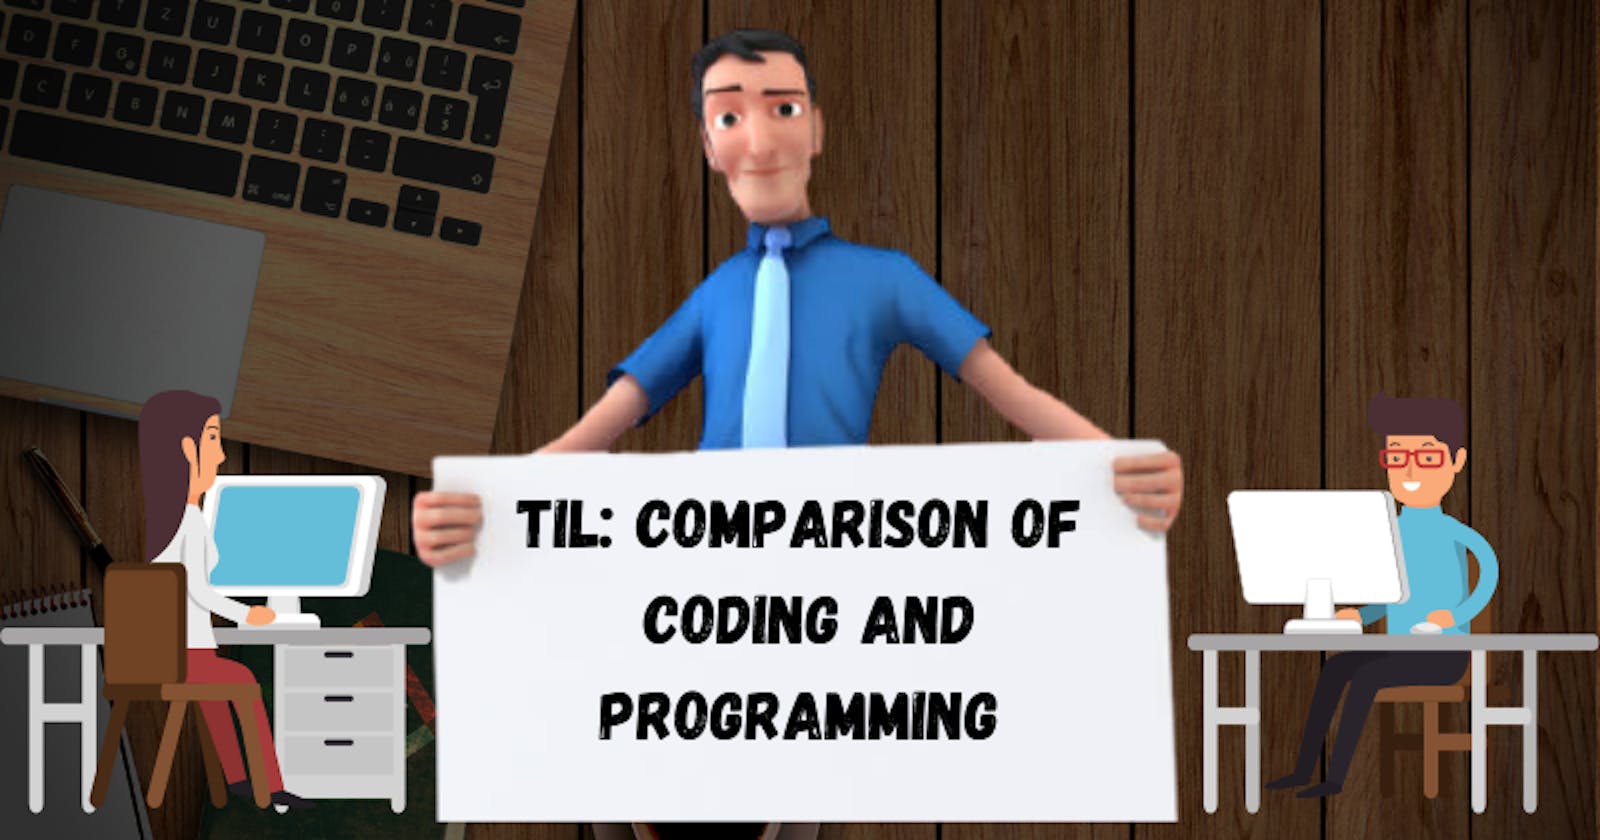 TIL: Comparison of Coding and Programming